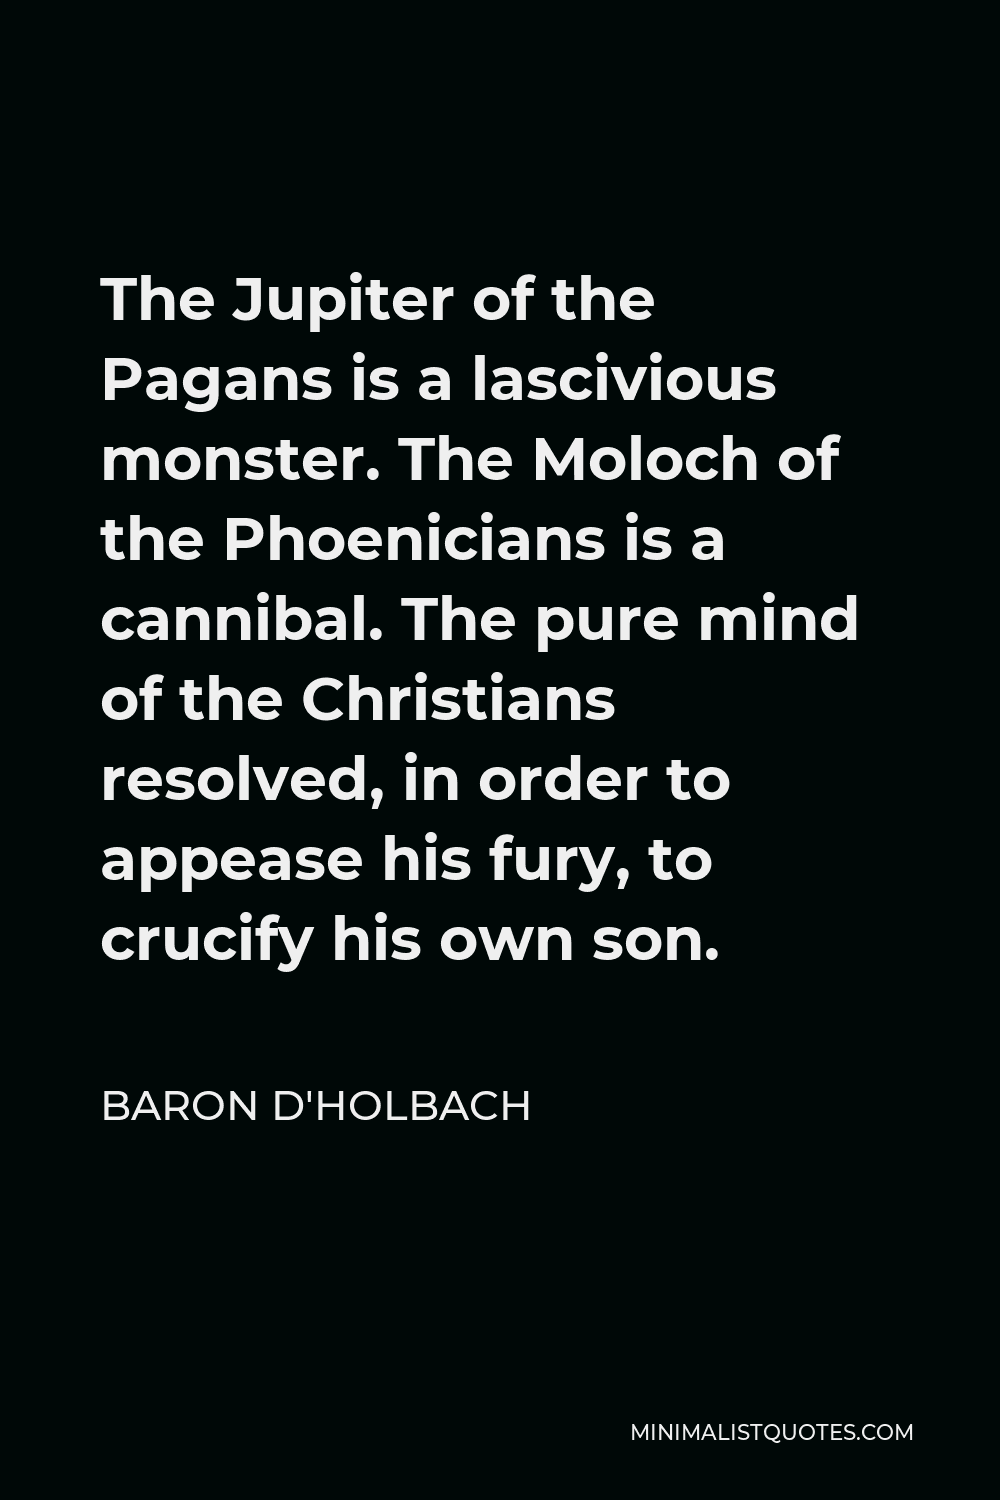 Baron d'Holbach Quote - The Jupiter of the Pagans is a lascivious monster. The Moloch of the Phoenicians is a cannibal. The pure mind of the Christians resolved, in order to appease his fury, to crucify his own son.